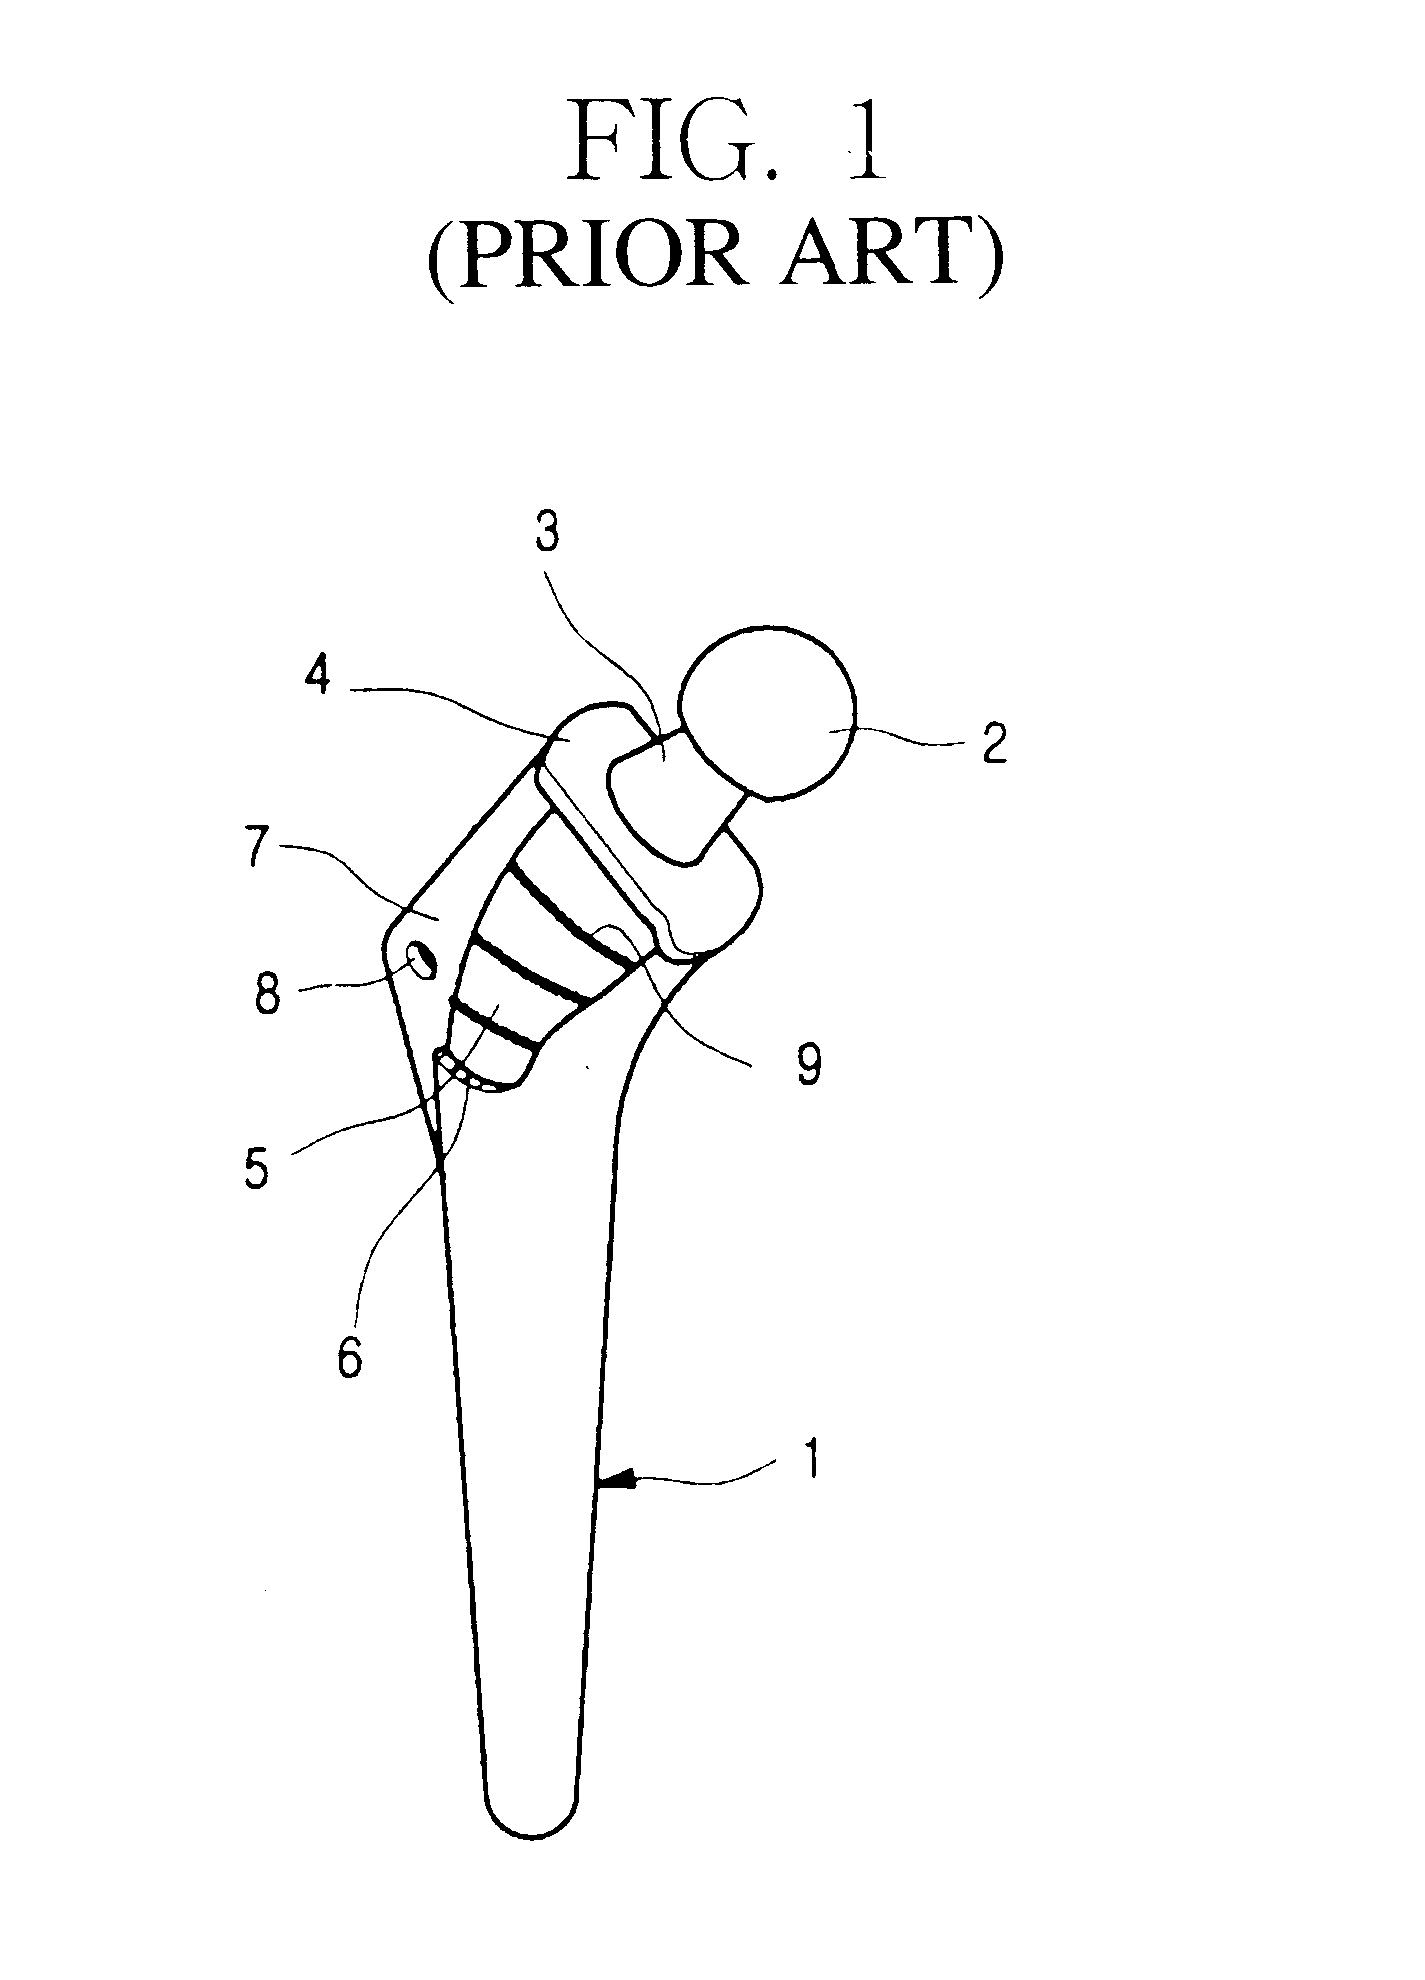 Metal jacket for a cementless artificial joint stem and artificial joint having the jacket